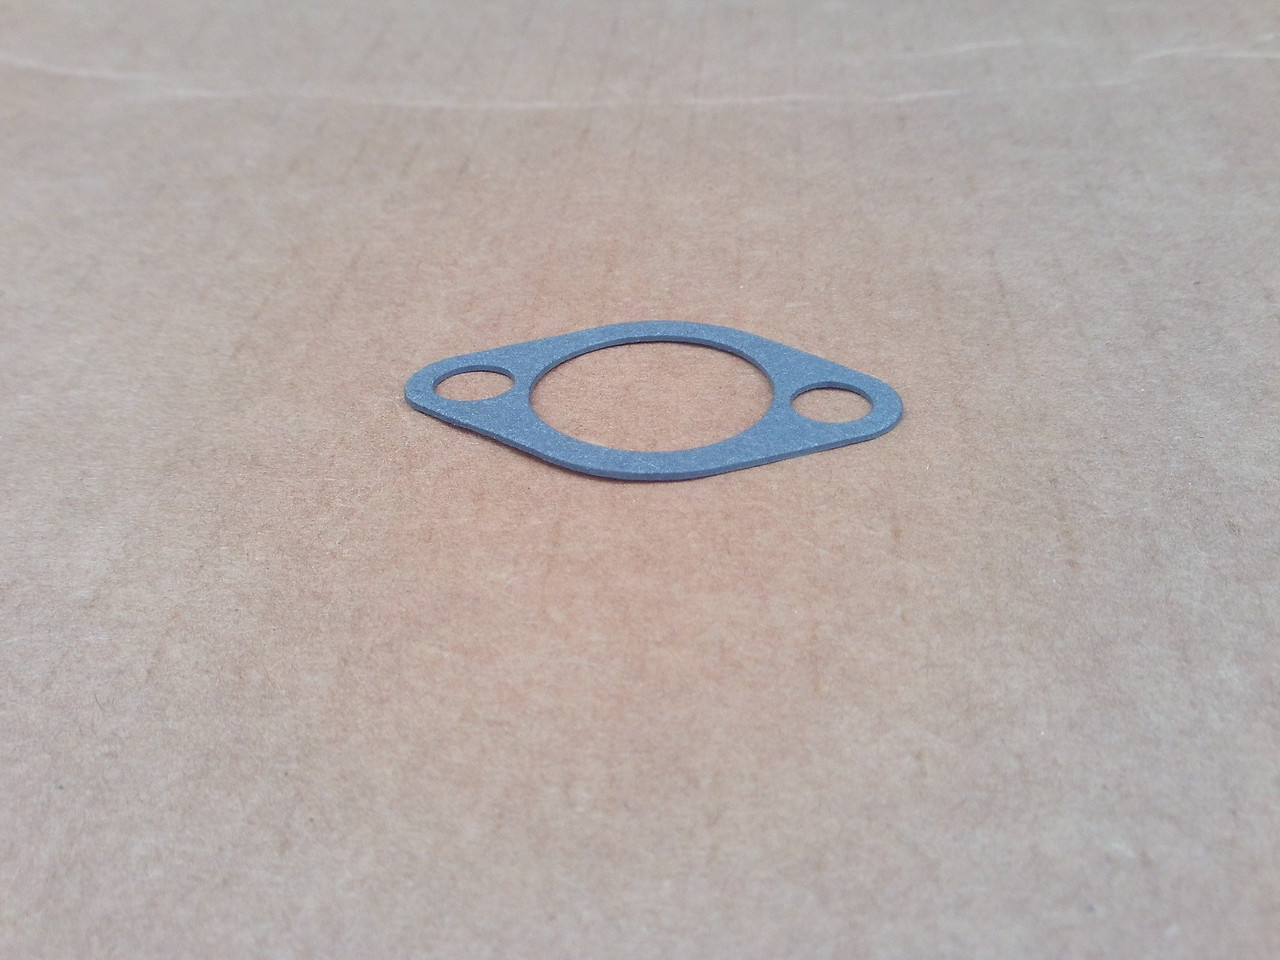 Muffler Gasket for Snapper 12422, 7012422, 7012422YP, 1-2422, 8 HP, Made In USA